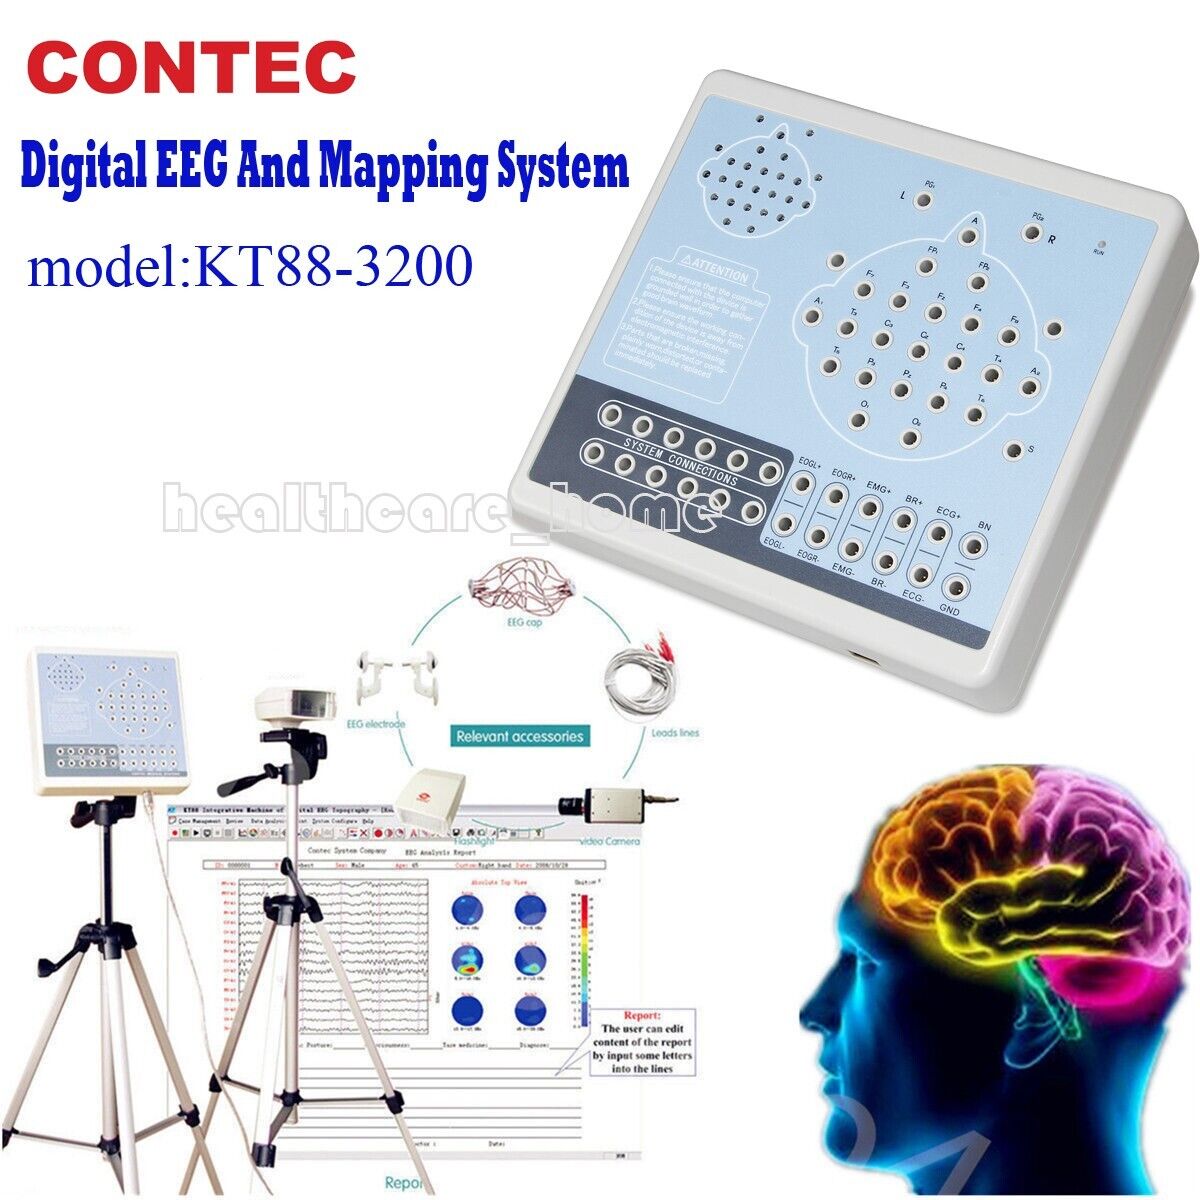 EEG machine CONTEC KT88-3200 Digital 32-Channel EEG and Mapping System+2 Tripods